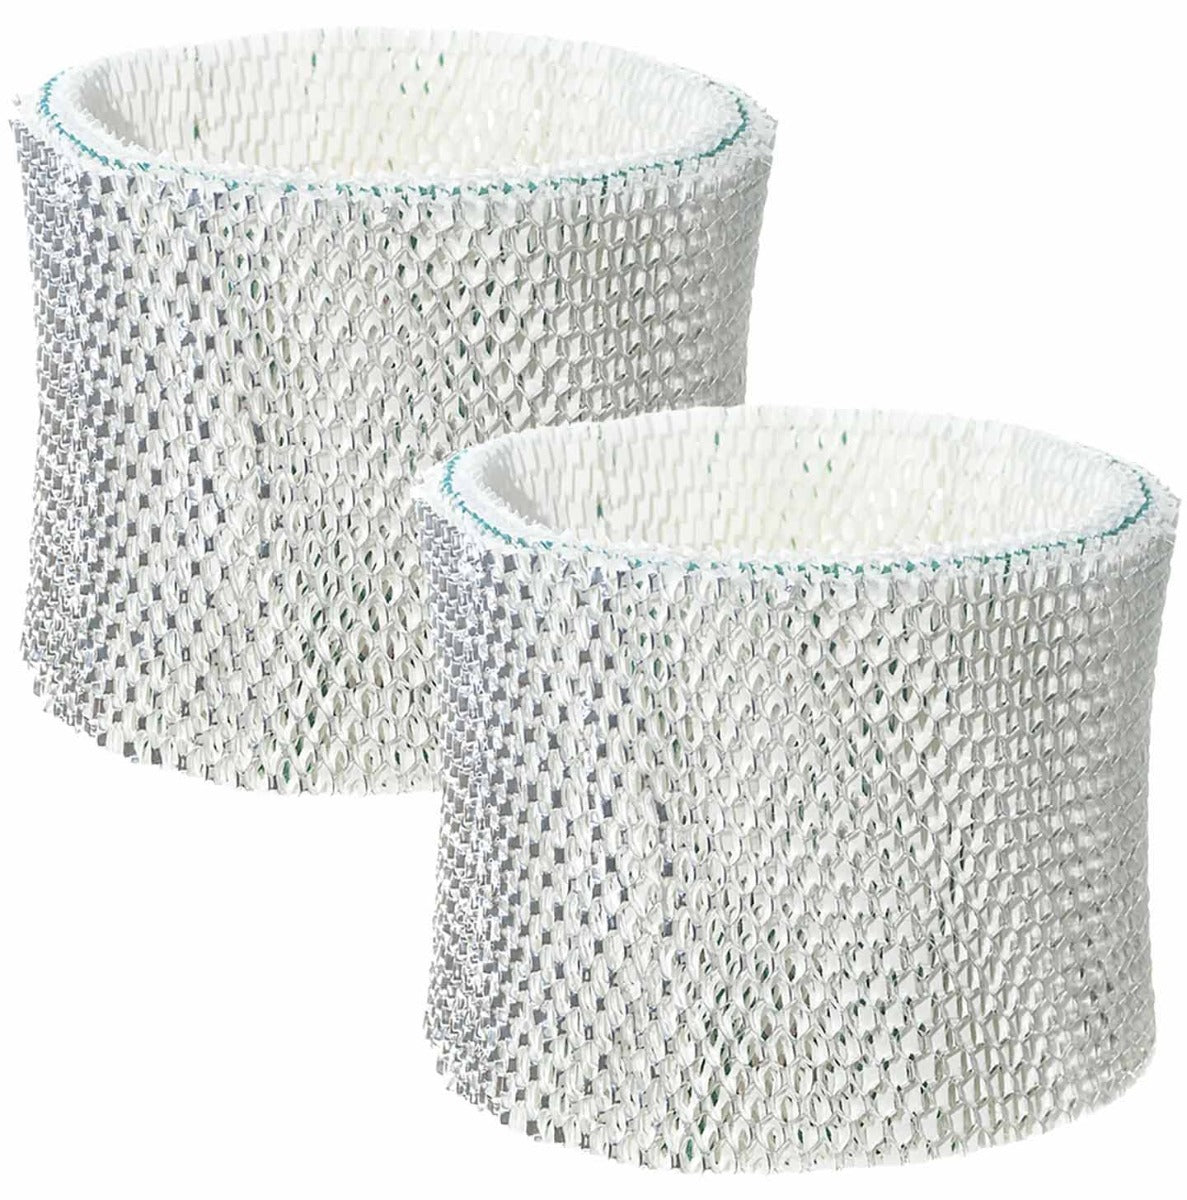 Holmes HWF72/HWF75 Comparable Humidifier Replacement Filter By Tier1